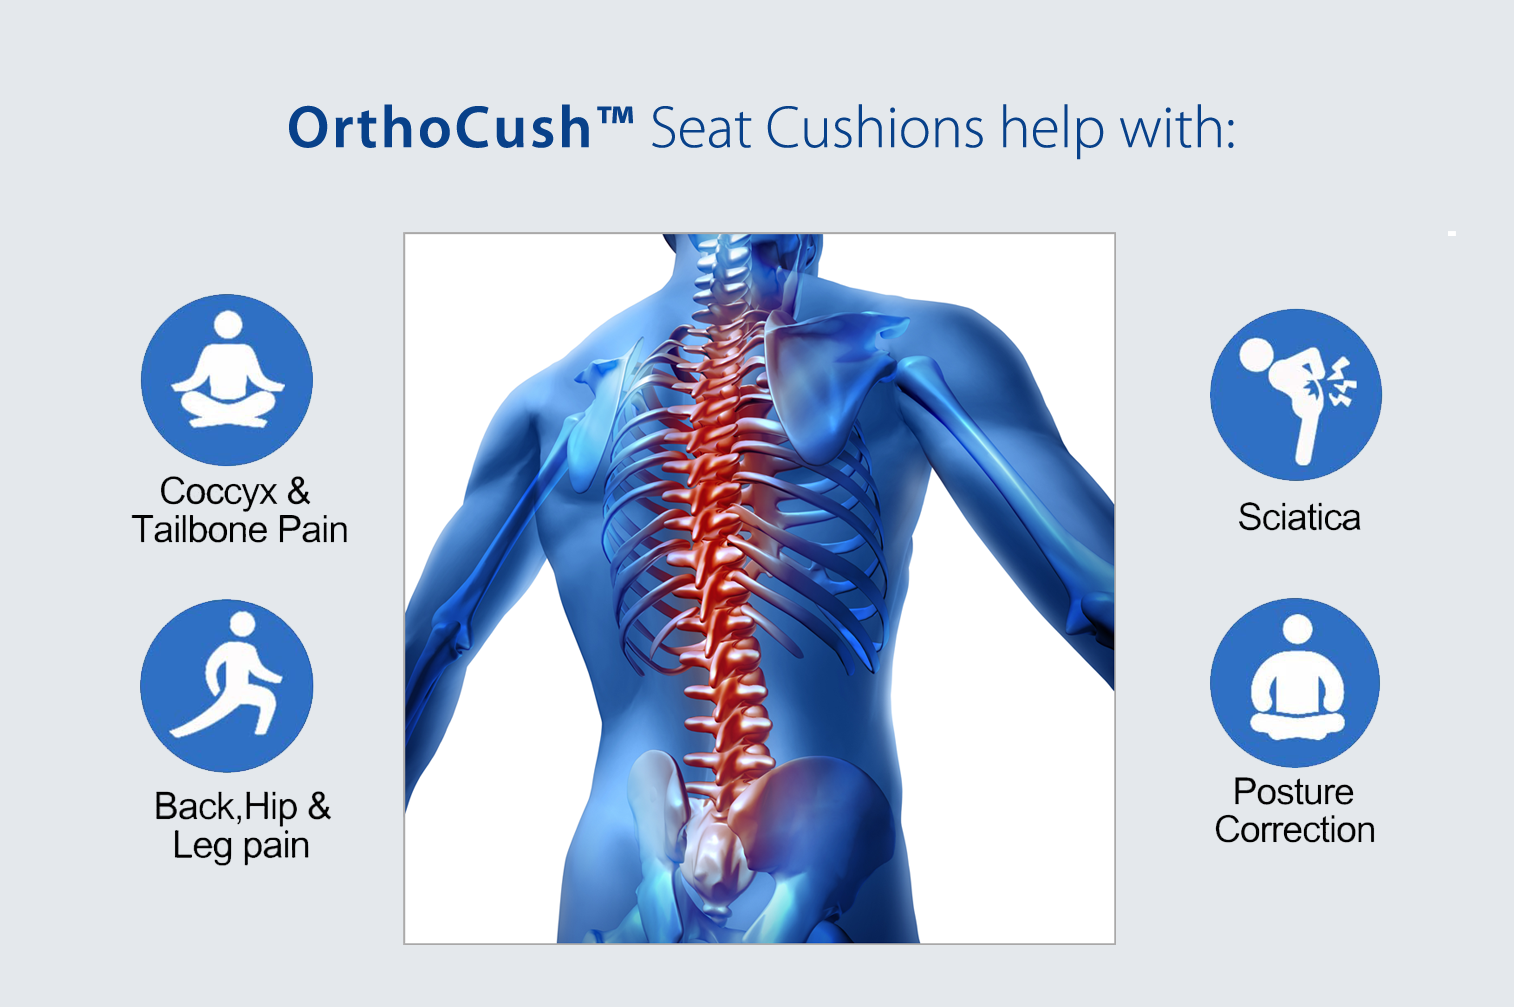 OrthoCush Support Helps With